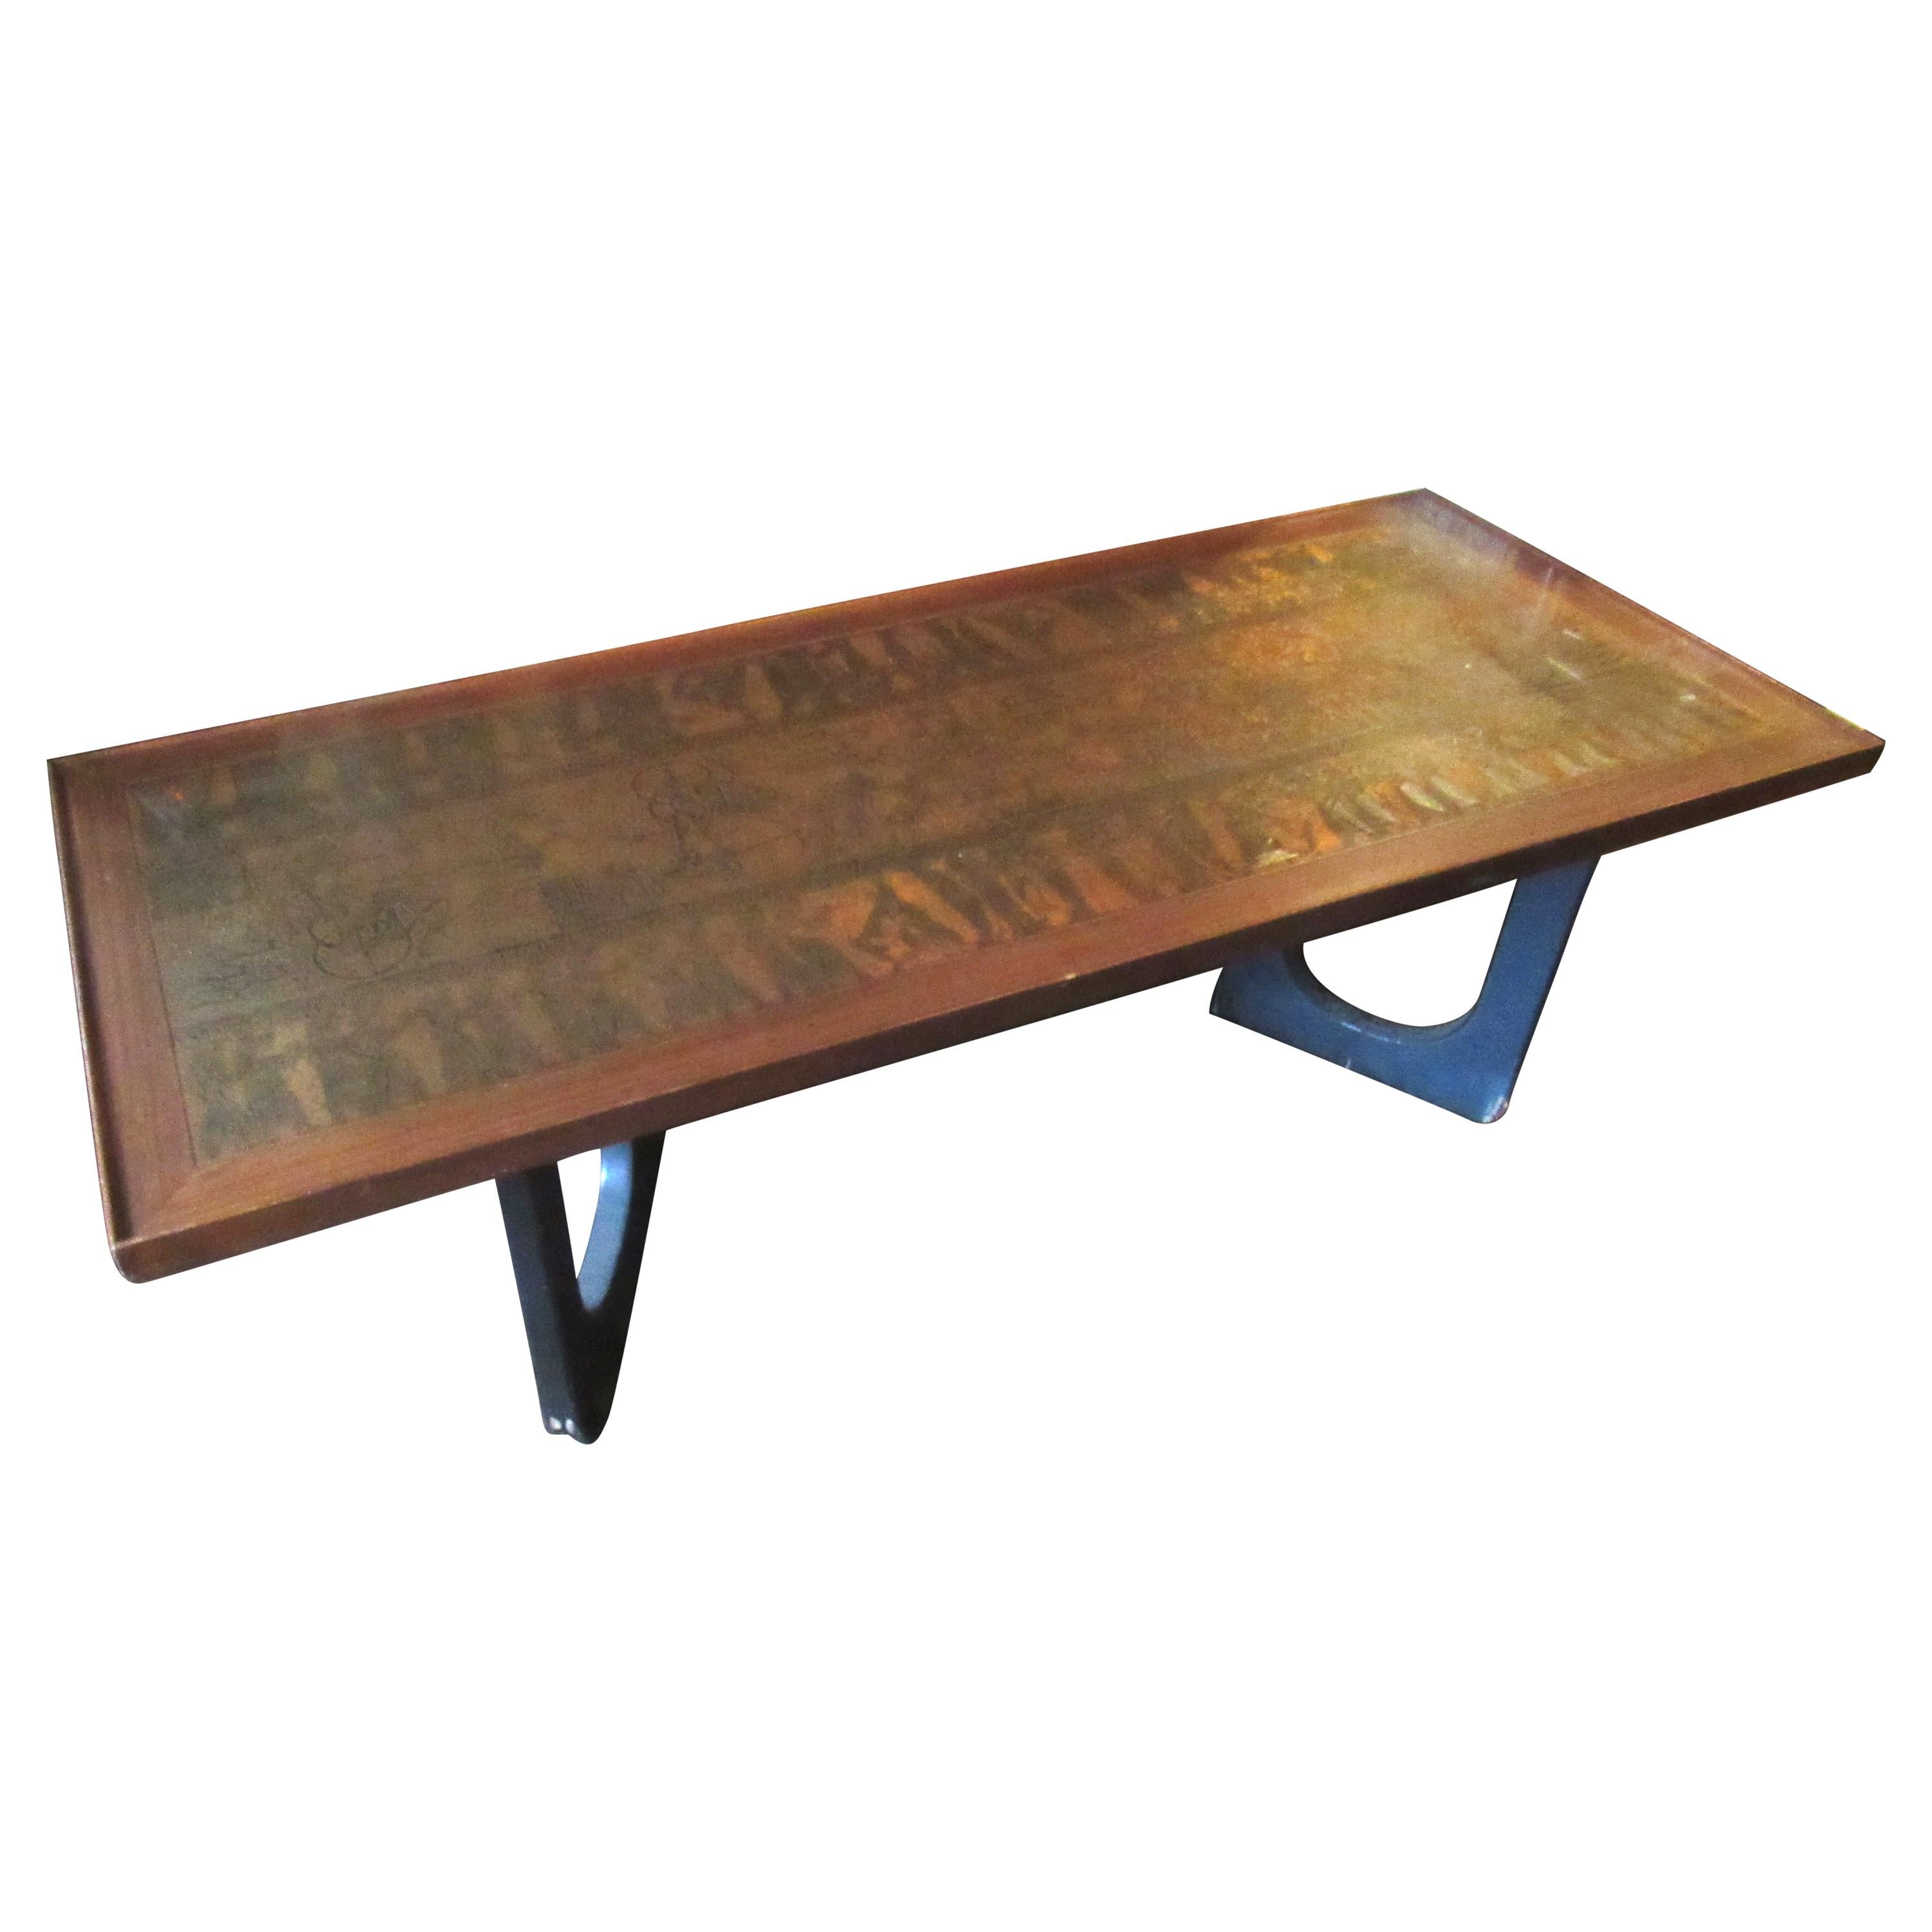 Mid-Century Modern/Egyptian Revival Copper Inlaid Coffee Table For Sale